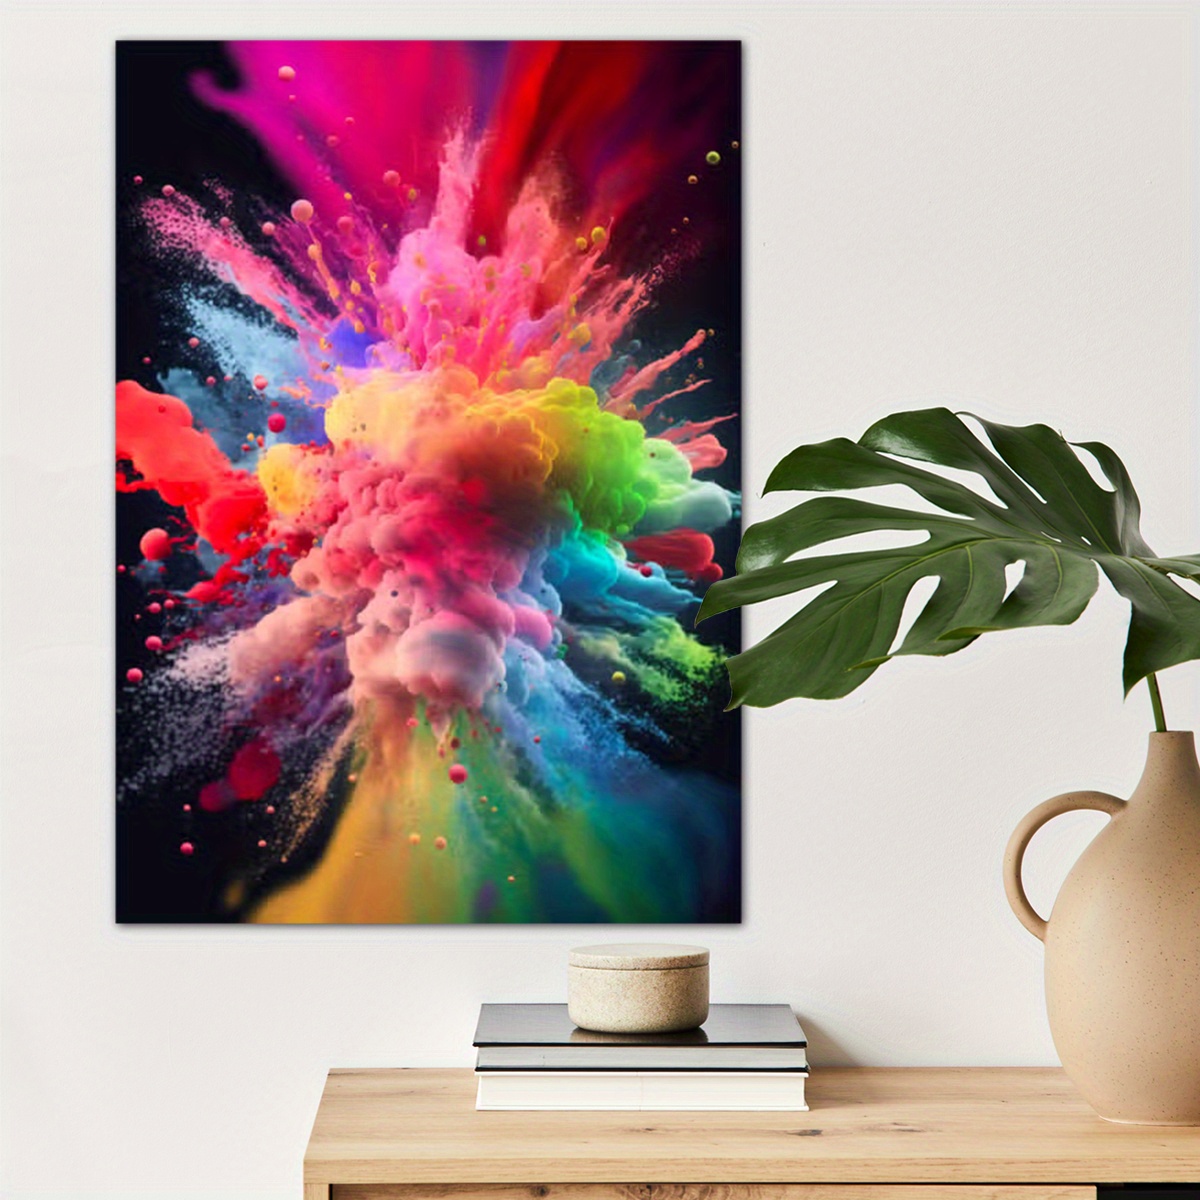 

1pc Colors Are Ideas Canvas Wall Art For Home Decor, Abstract Fantasy Poster Wall Decor High Quality Canvas Prints For Living Room Bedroom Kitchen Office Cafe Decor, Perfect Gift And Decoration